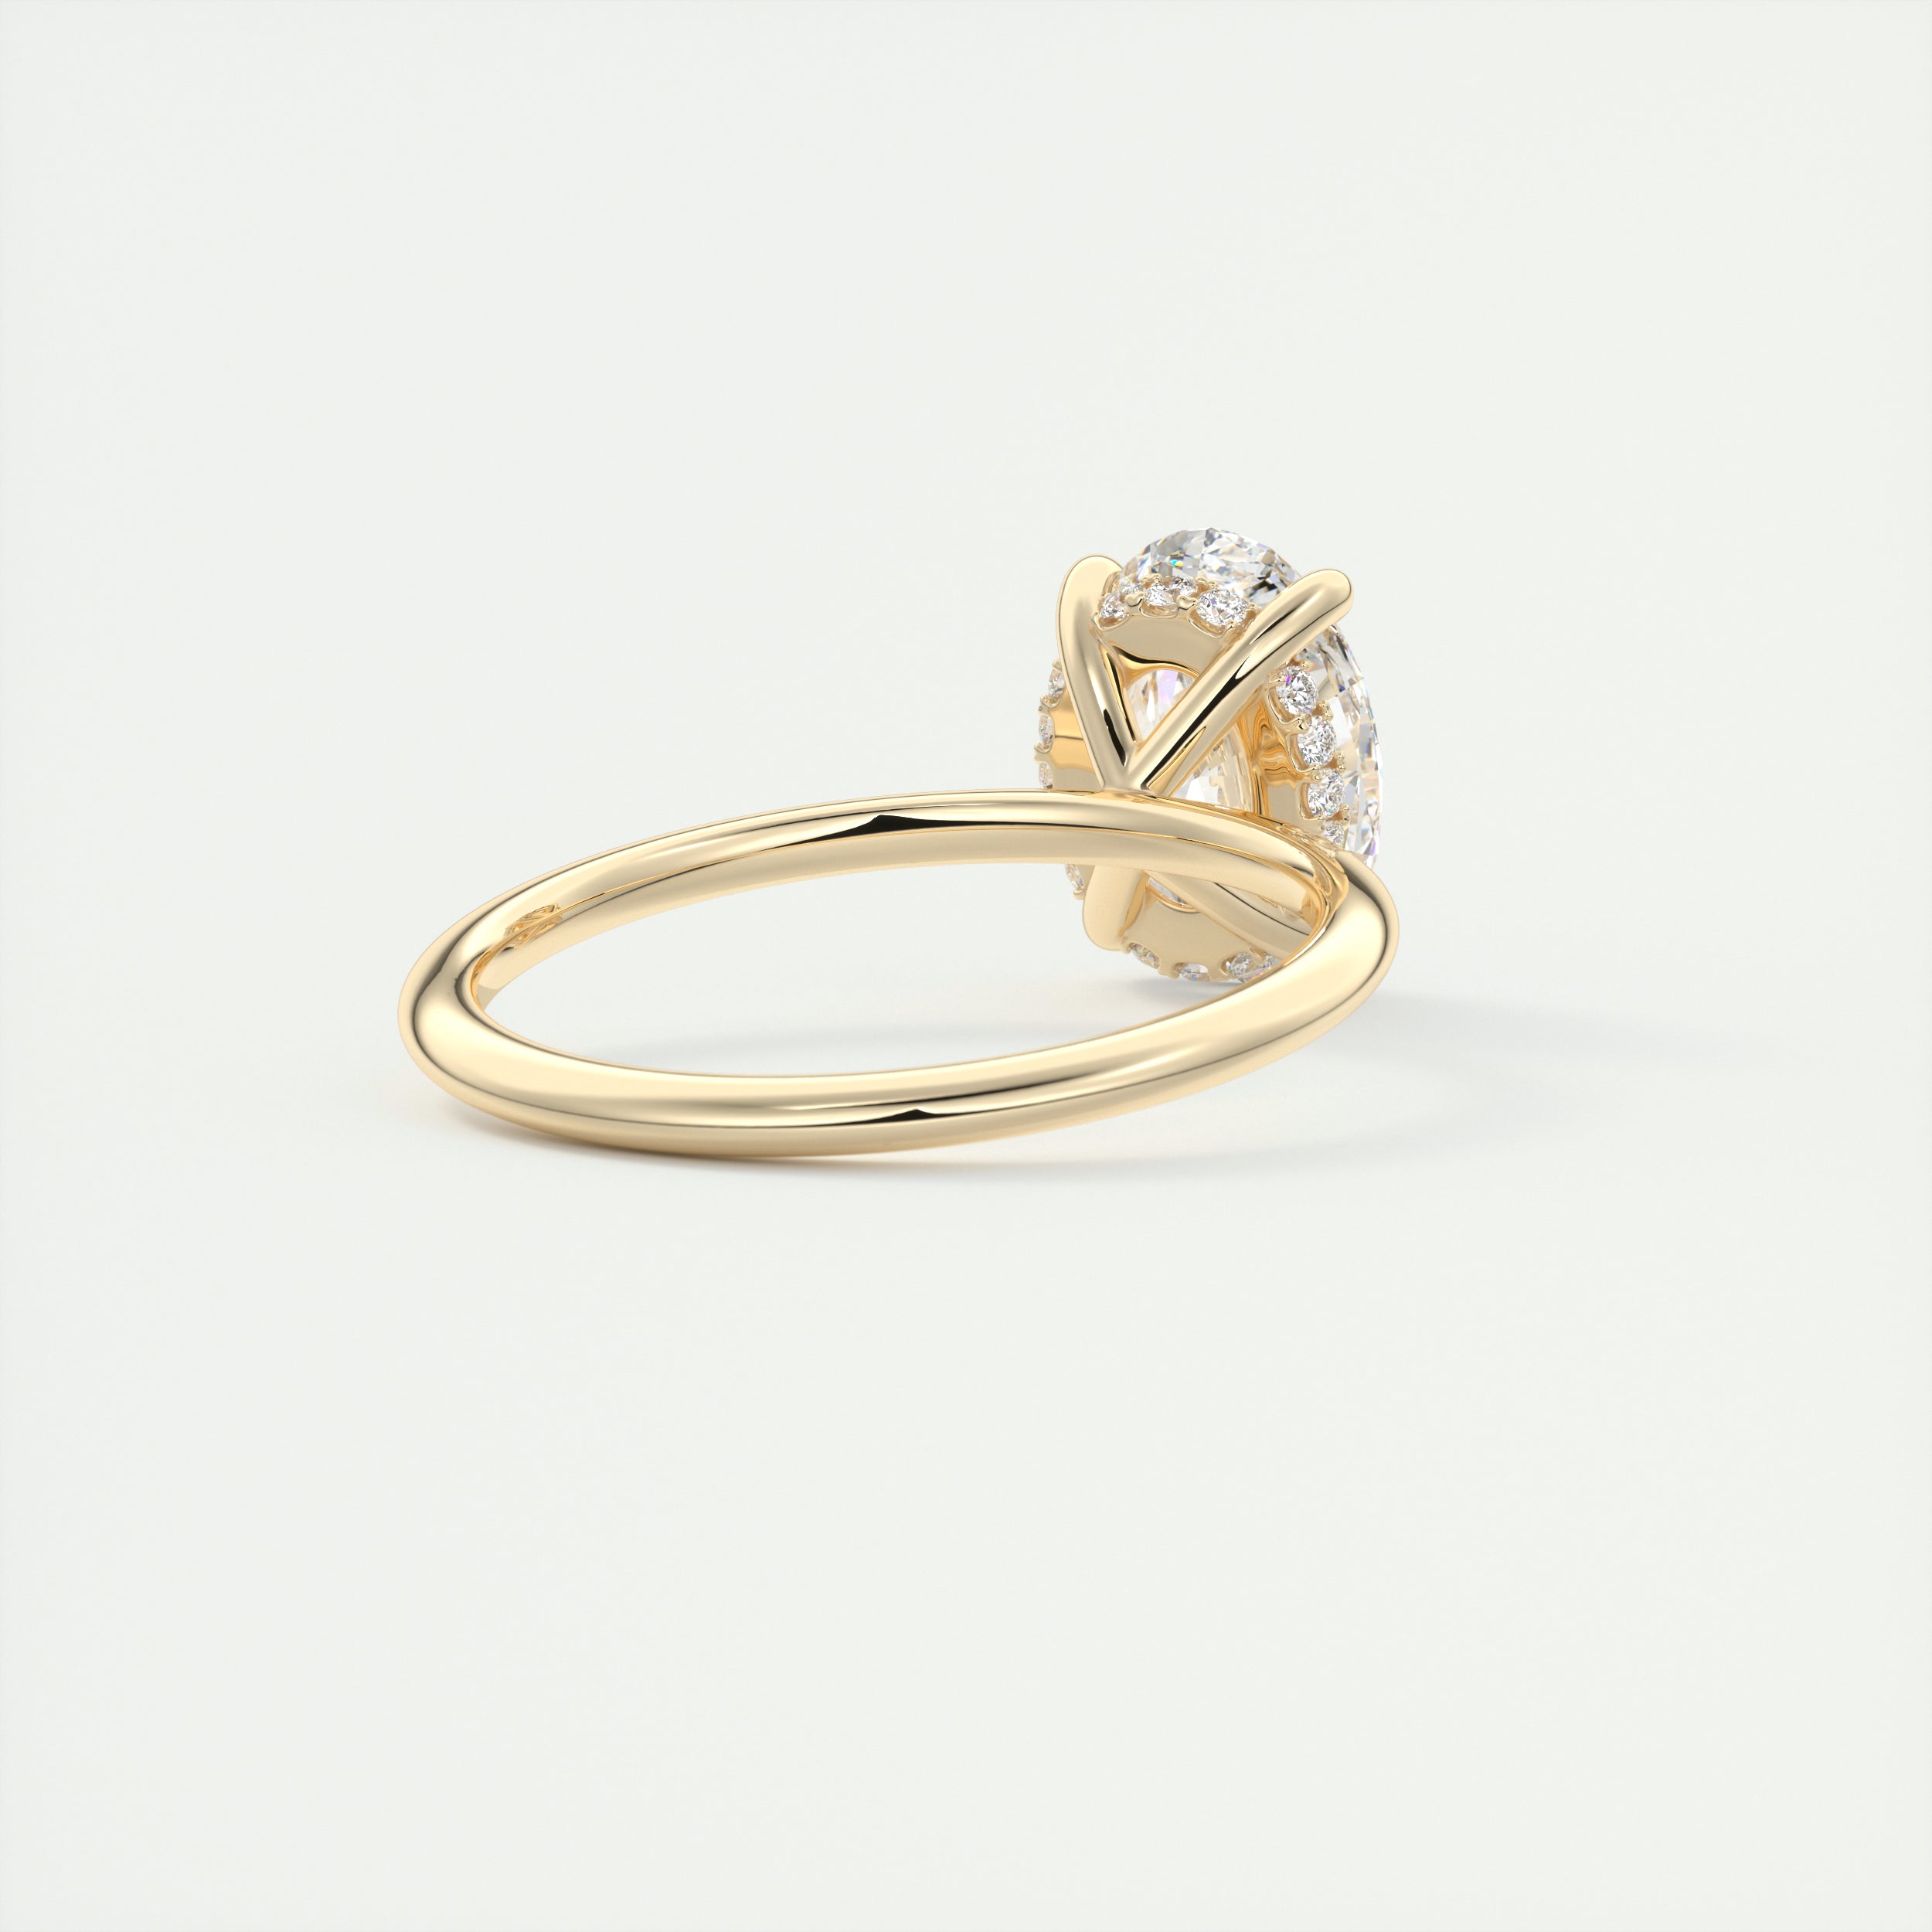 HRP595 4 Claw Princess cut Solitaire Ring | Shining Diamonds®